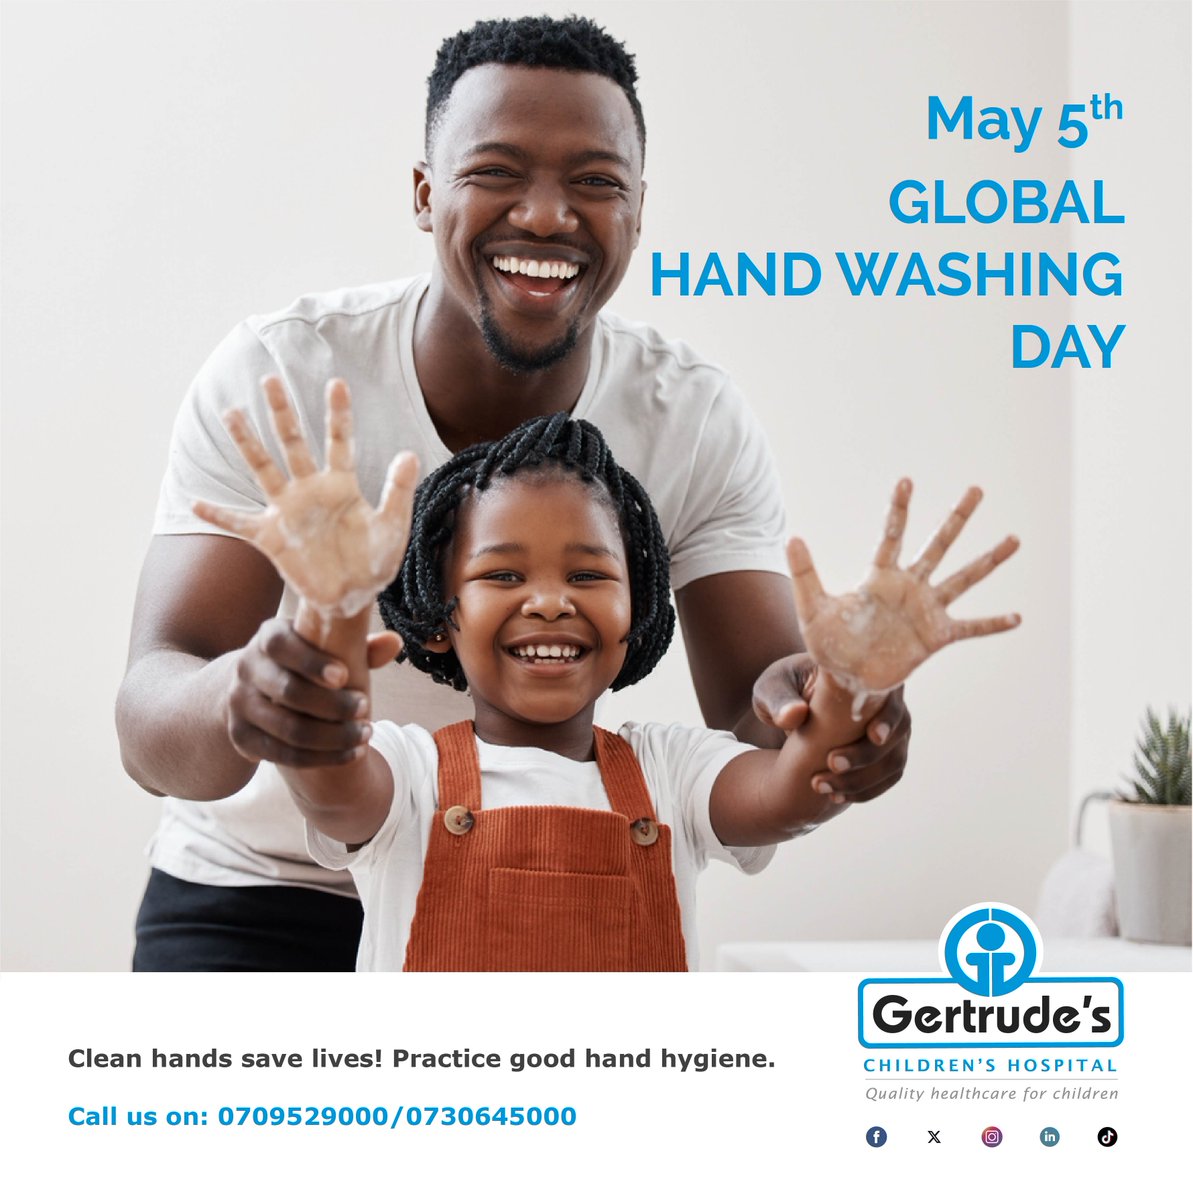 Keep those hands clean! It's Global Hand Washing Day, a reminder of the importance of hand hygiene in preventing the spread of illness. Let's all do our part to stay healthy and safe! Call 0709529000. #GertrudesKe #GertrudesCares #GlobalHandWashingDay #CleanHandsSaveLives